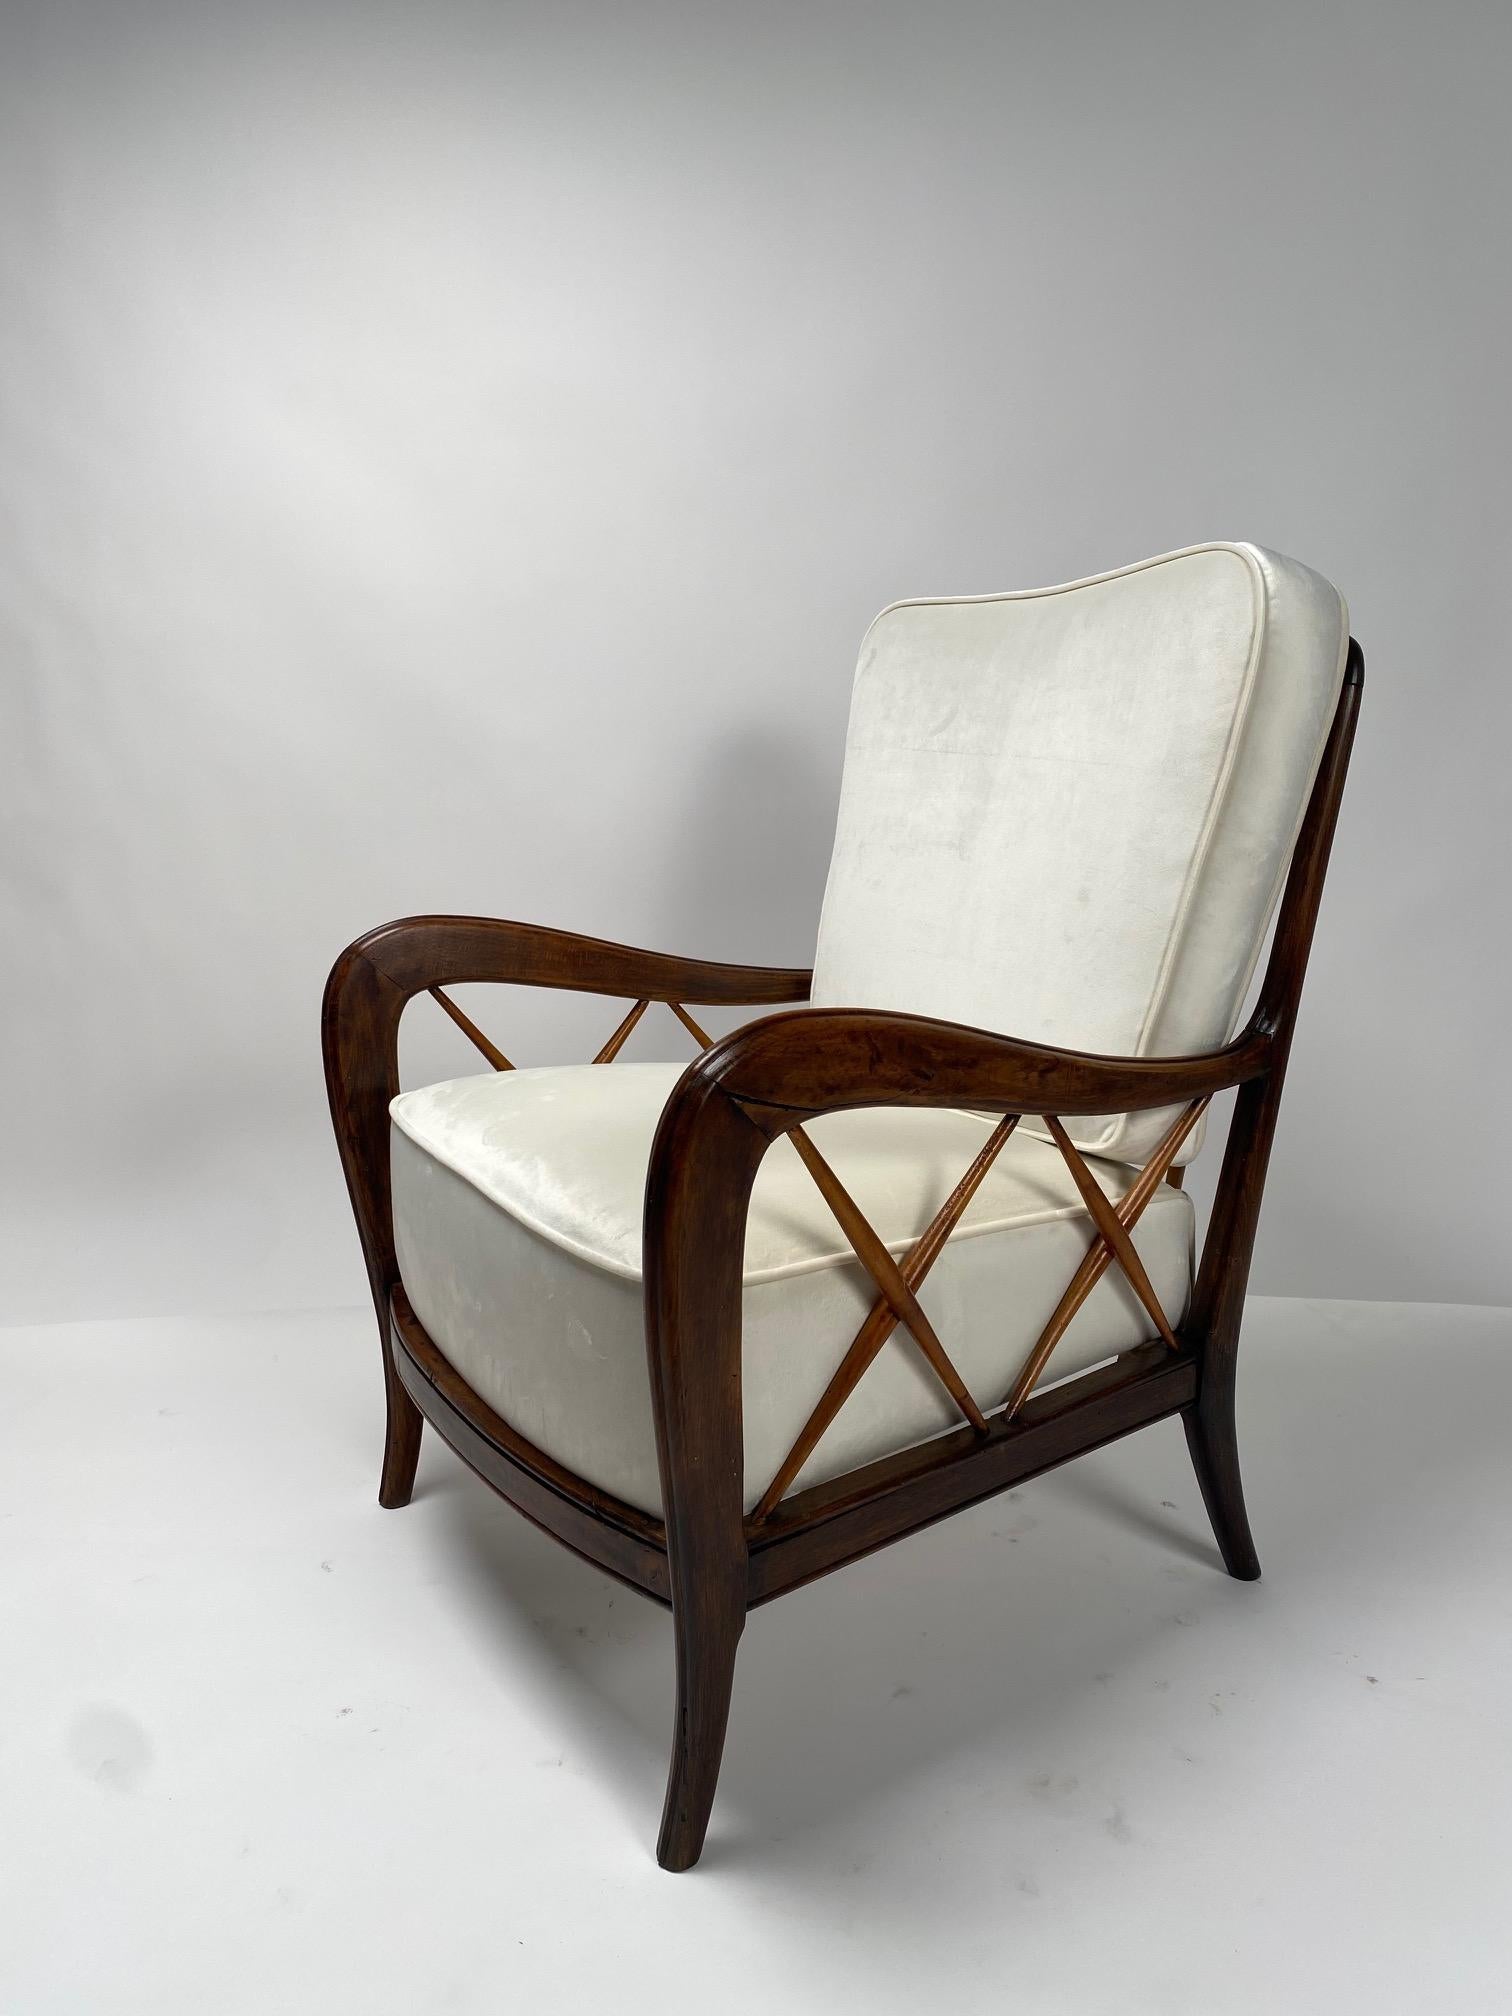 Pair of 1950s armchairs by Paolo Buffa, Italy, 1950s

One of the most iconic and representative models of 1950s Italian design, wooden structure and cushions recently reupholstered with white velvet. These are elegant and refined armchairs, capable